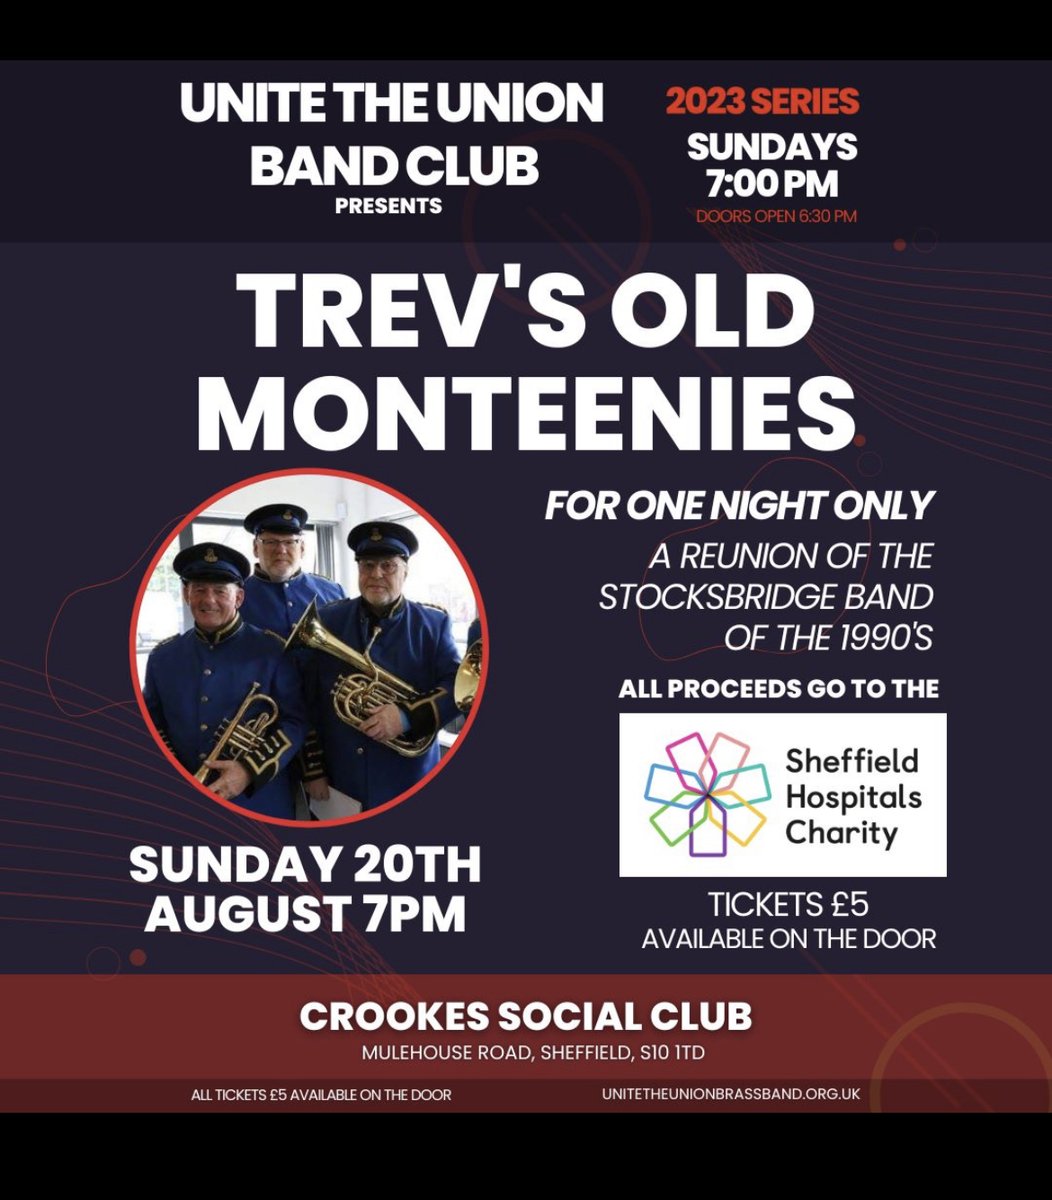 🎶🎺 @UniteBrassBand Update! 📍 Crookes Social Club, Mulehouse Road, Sheffield, S10 1TD 📆 Sunday 20th August 7PM 🎟️ £5 - all proceeds go to the Sheffield Hospitals Charity